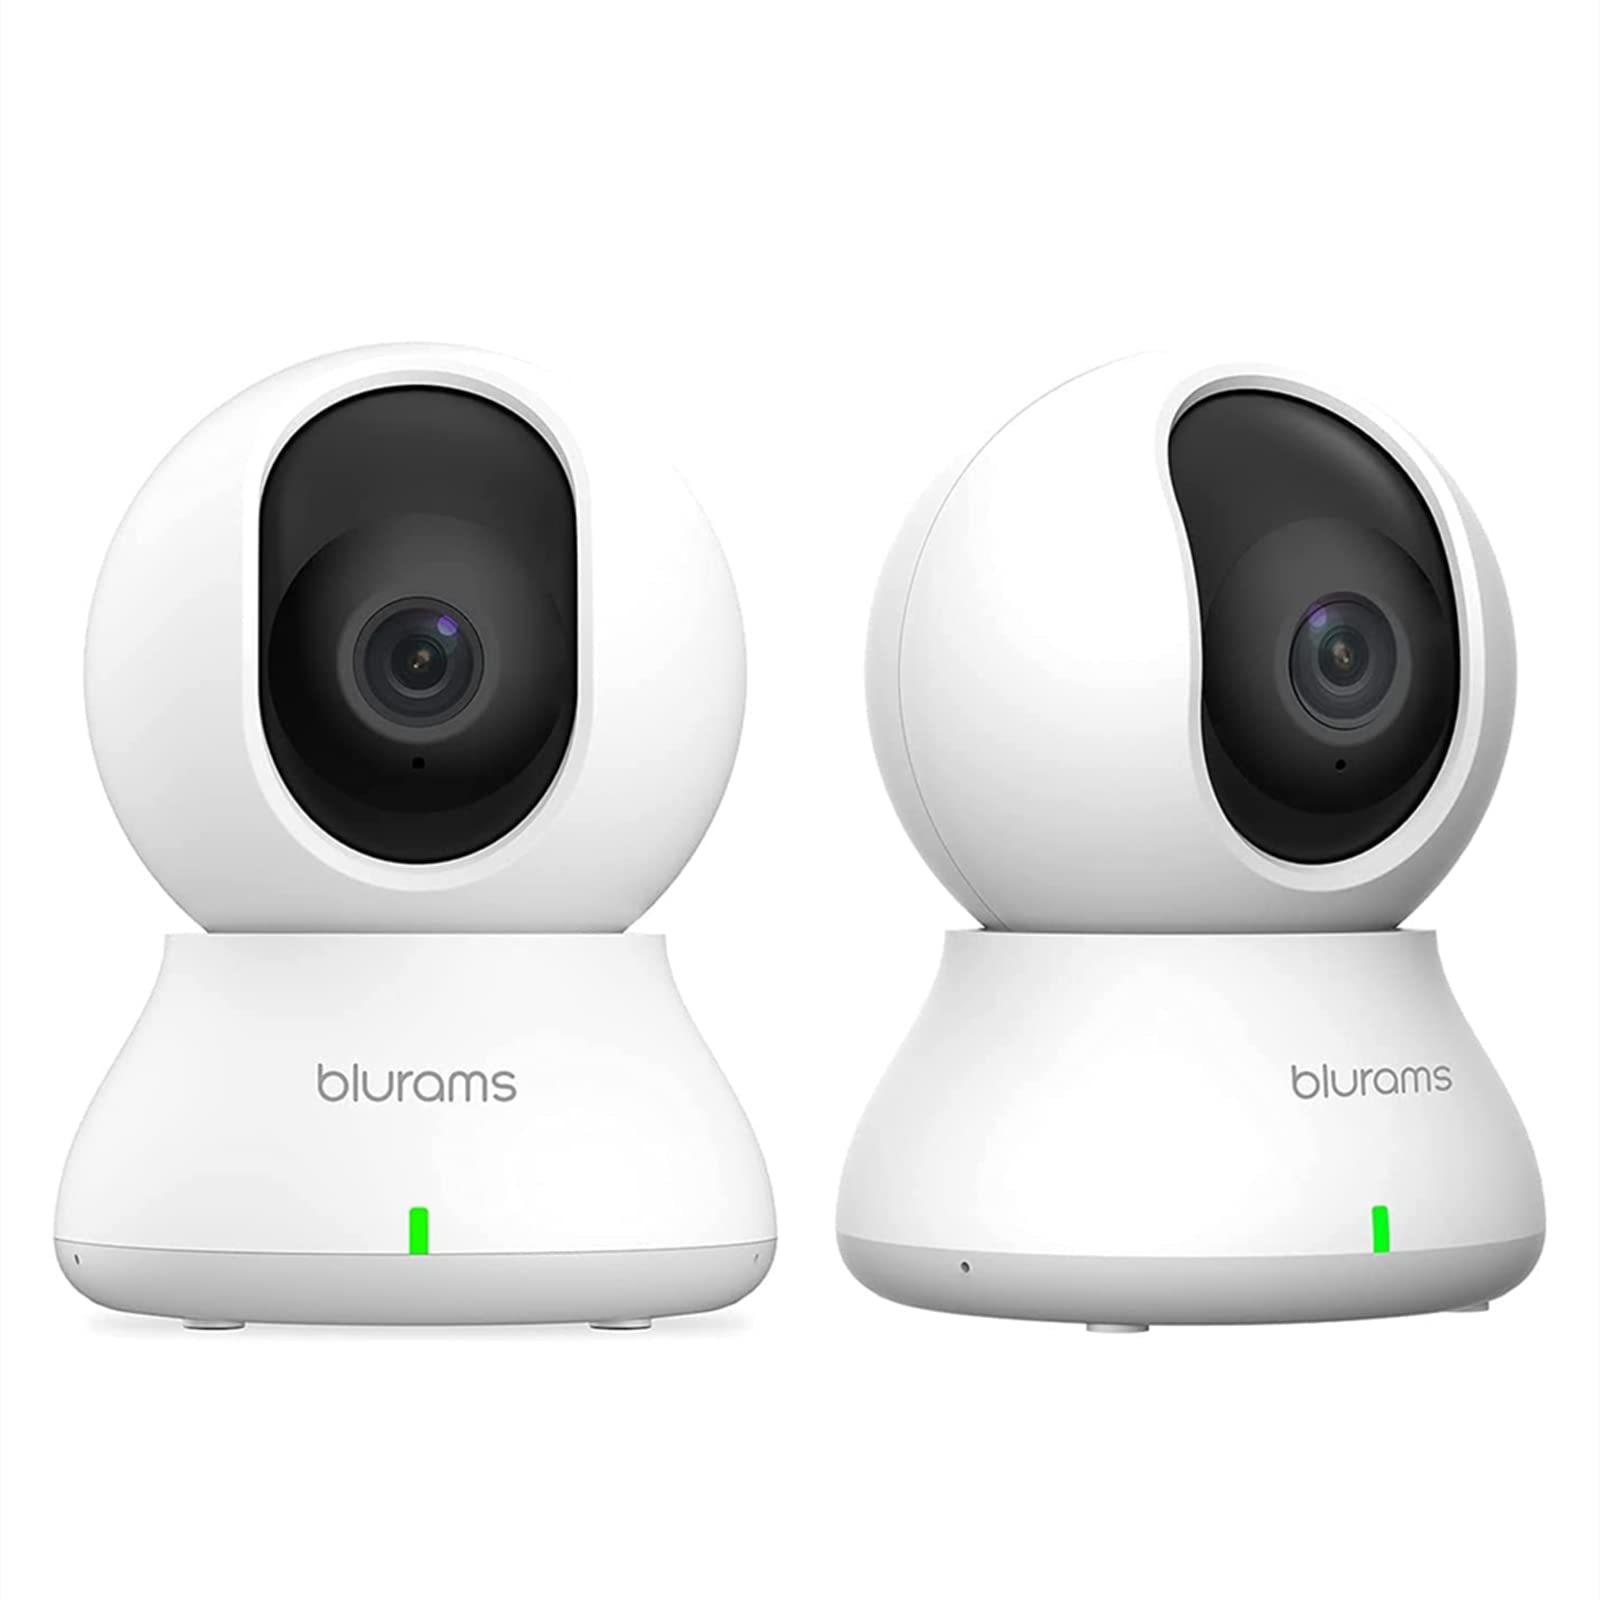 blurams Security Camera 2K Baby Monitor Dog Camera 2PCS for Home Security wSmart Motion Tracking Phone App IR Night Visio